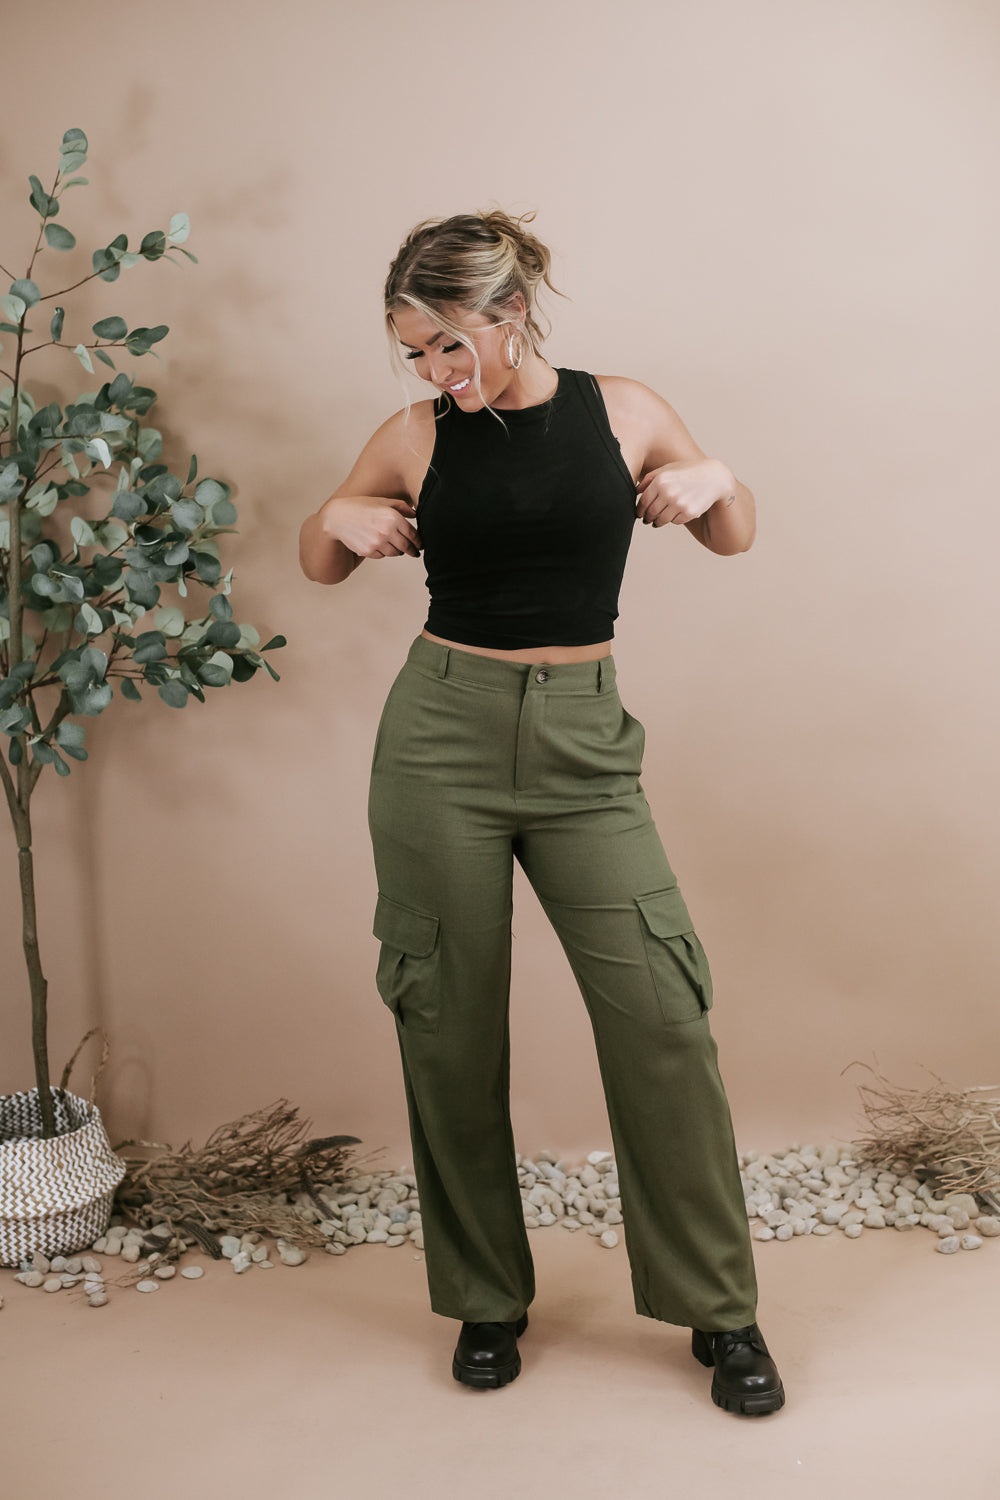 Pin by Jessmae Black on Clothing & photo hacks | Olive pants outfit, Green  cargo pants outfit, Cargo pants outfit